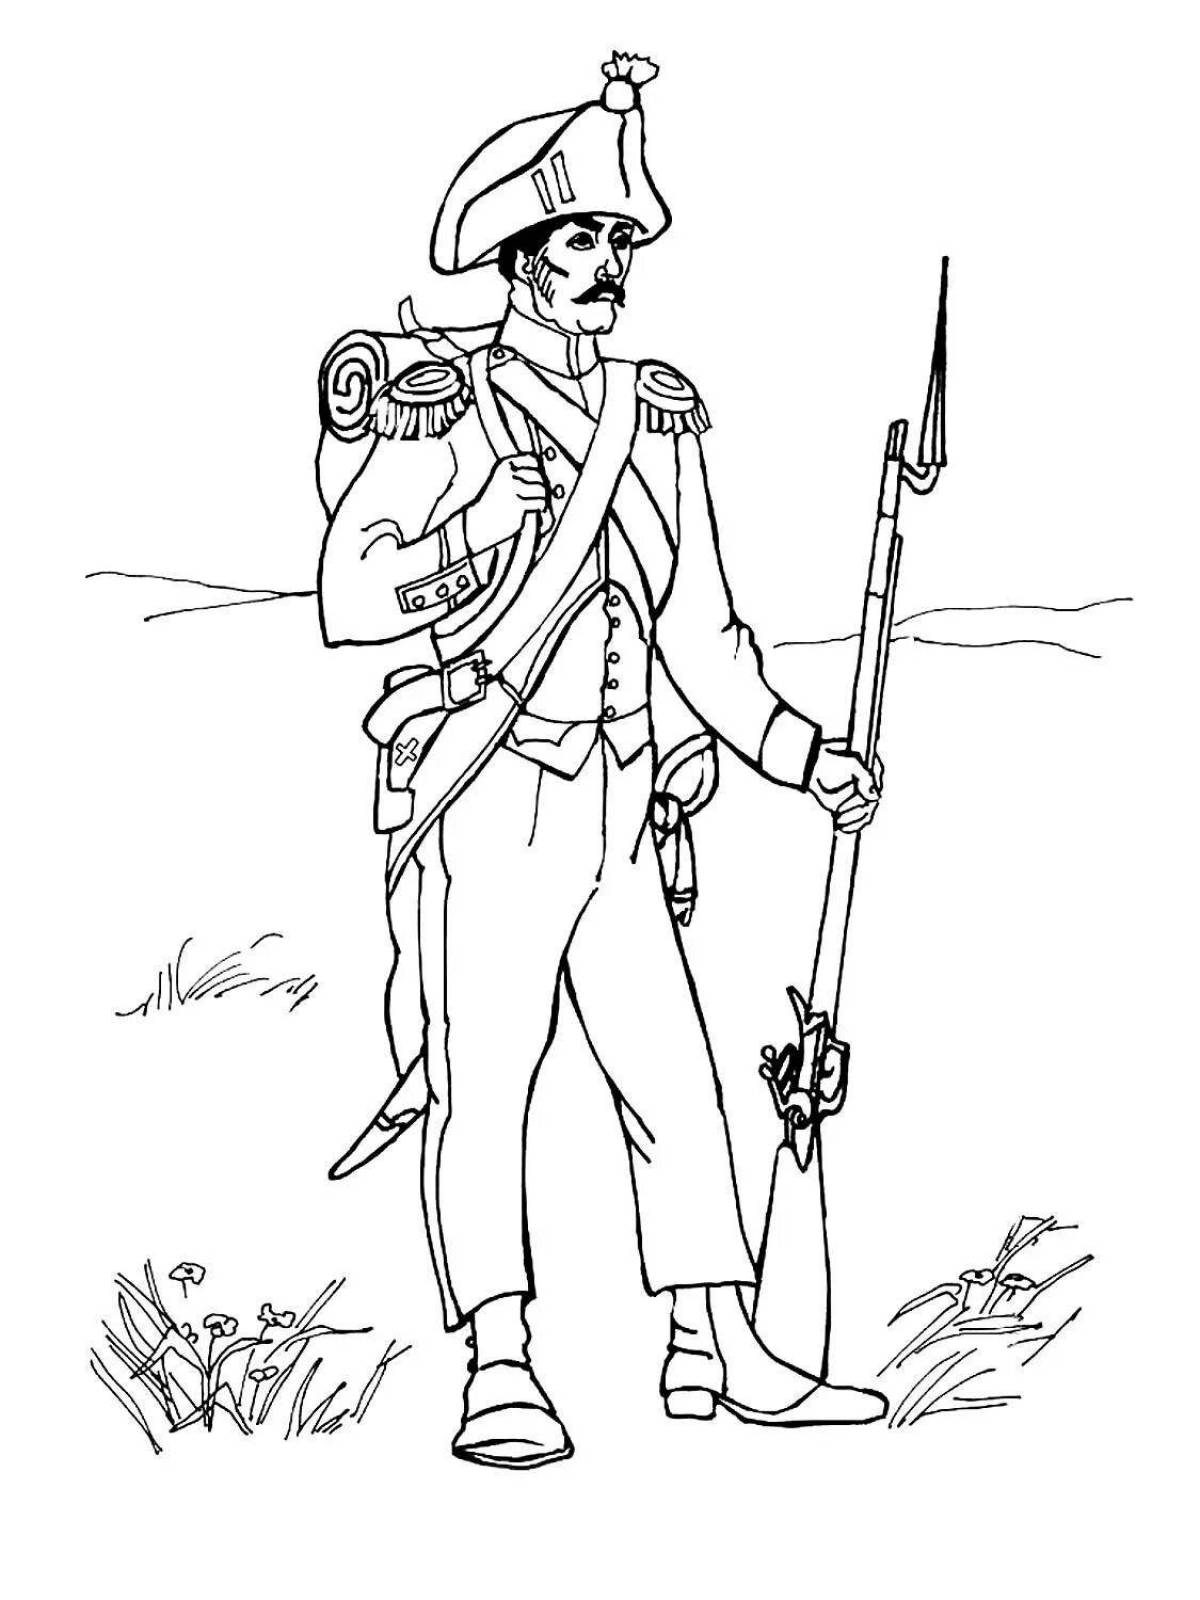 Radiant Hussar coloring page